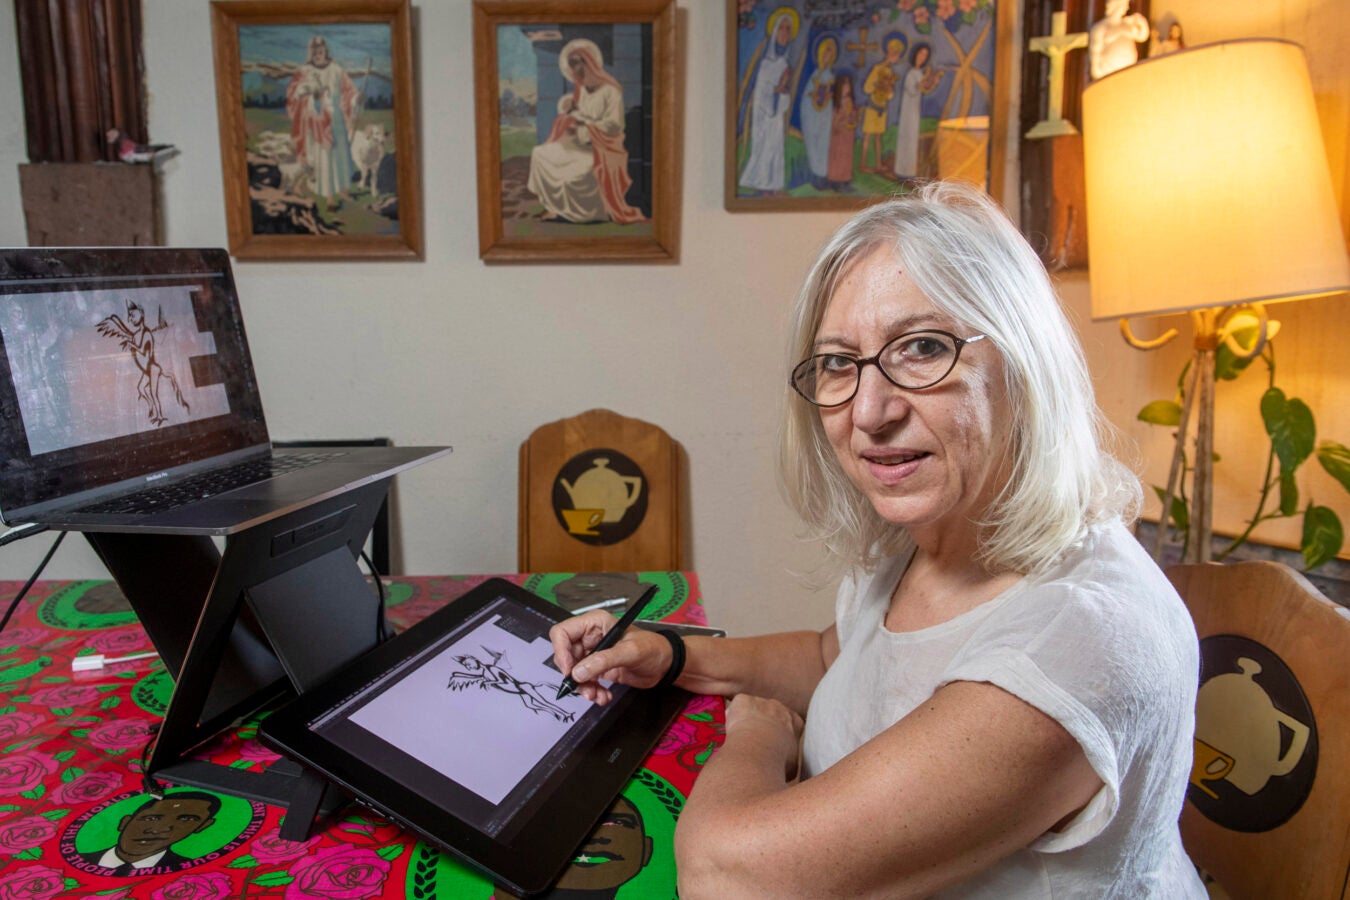 Ruth Lingford draws on a tablet in her studio.